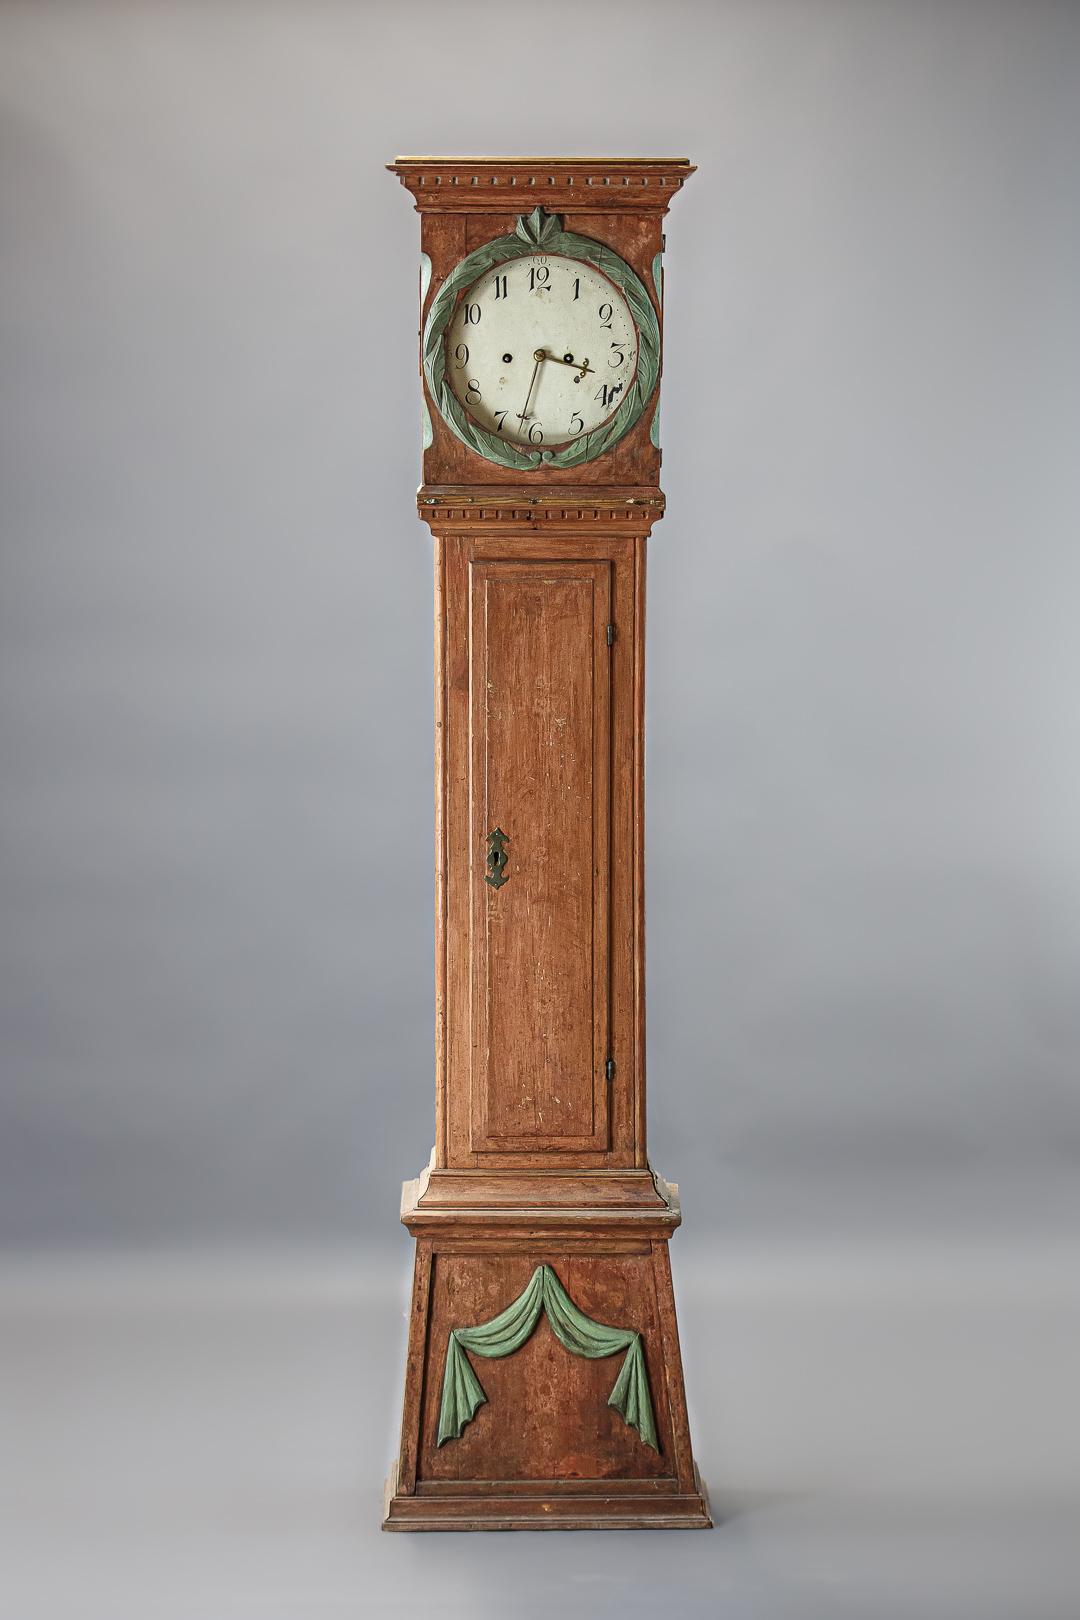 Early 19th century Danish clock, original painted finish, intricate wood carving. Appears internals have been updated and replaced, sold as decorative only, but mechanics, weights and pendulum all present.